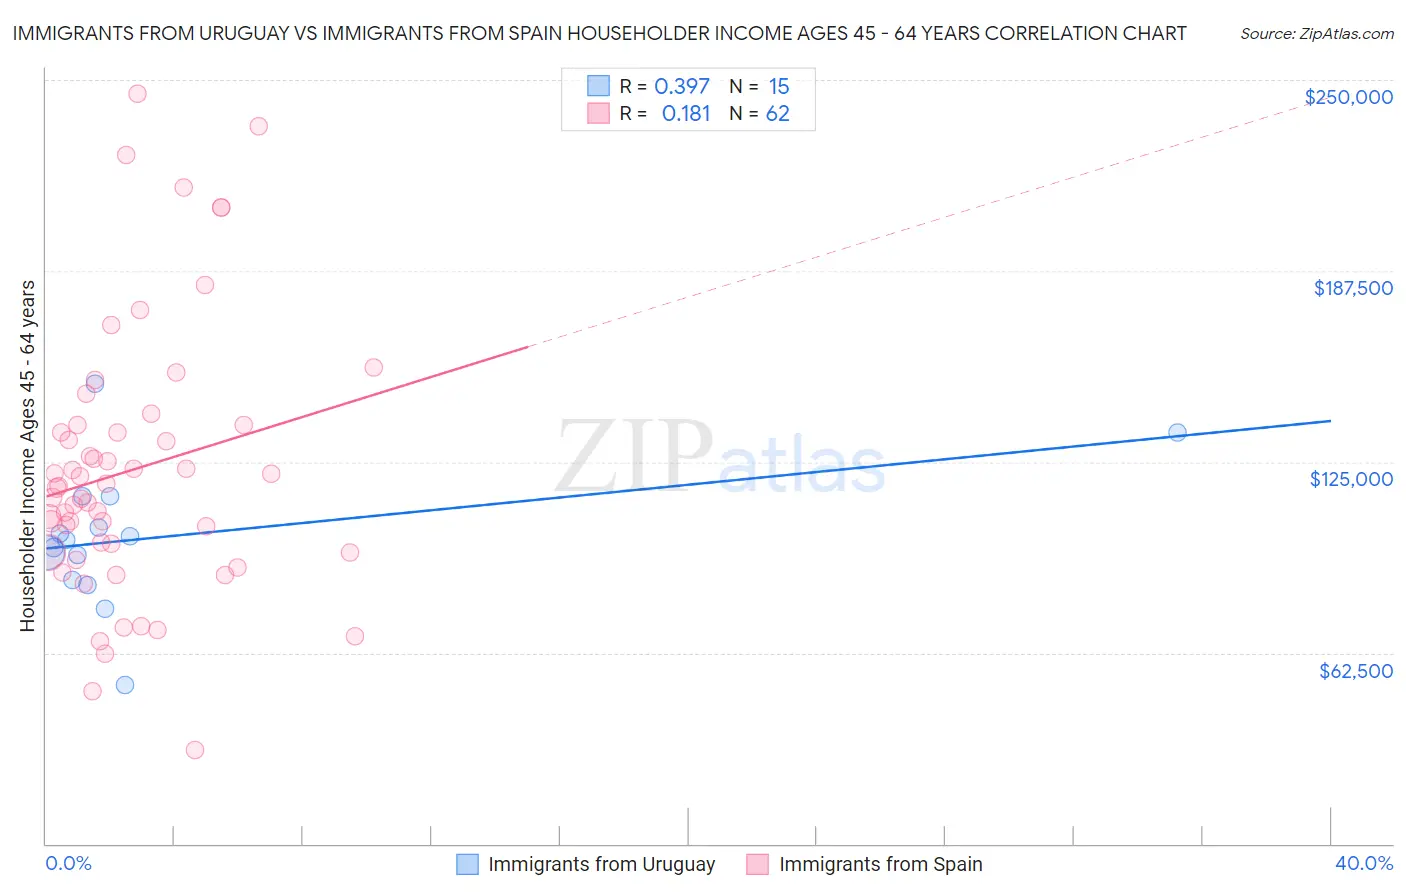 Immigrants from Uruguay vs Immigrants from Spain Householder Income Ages 45 - 64 years